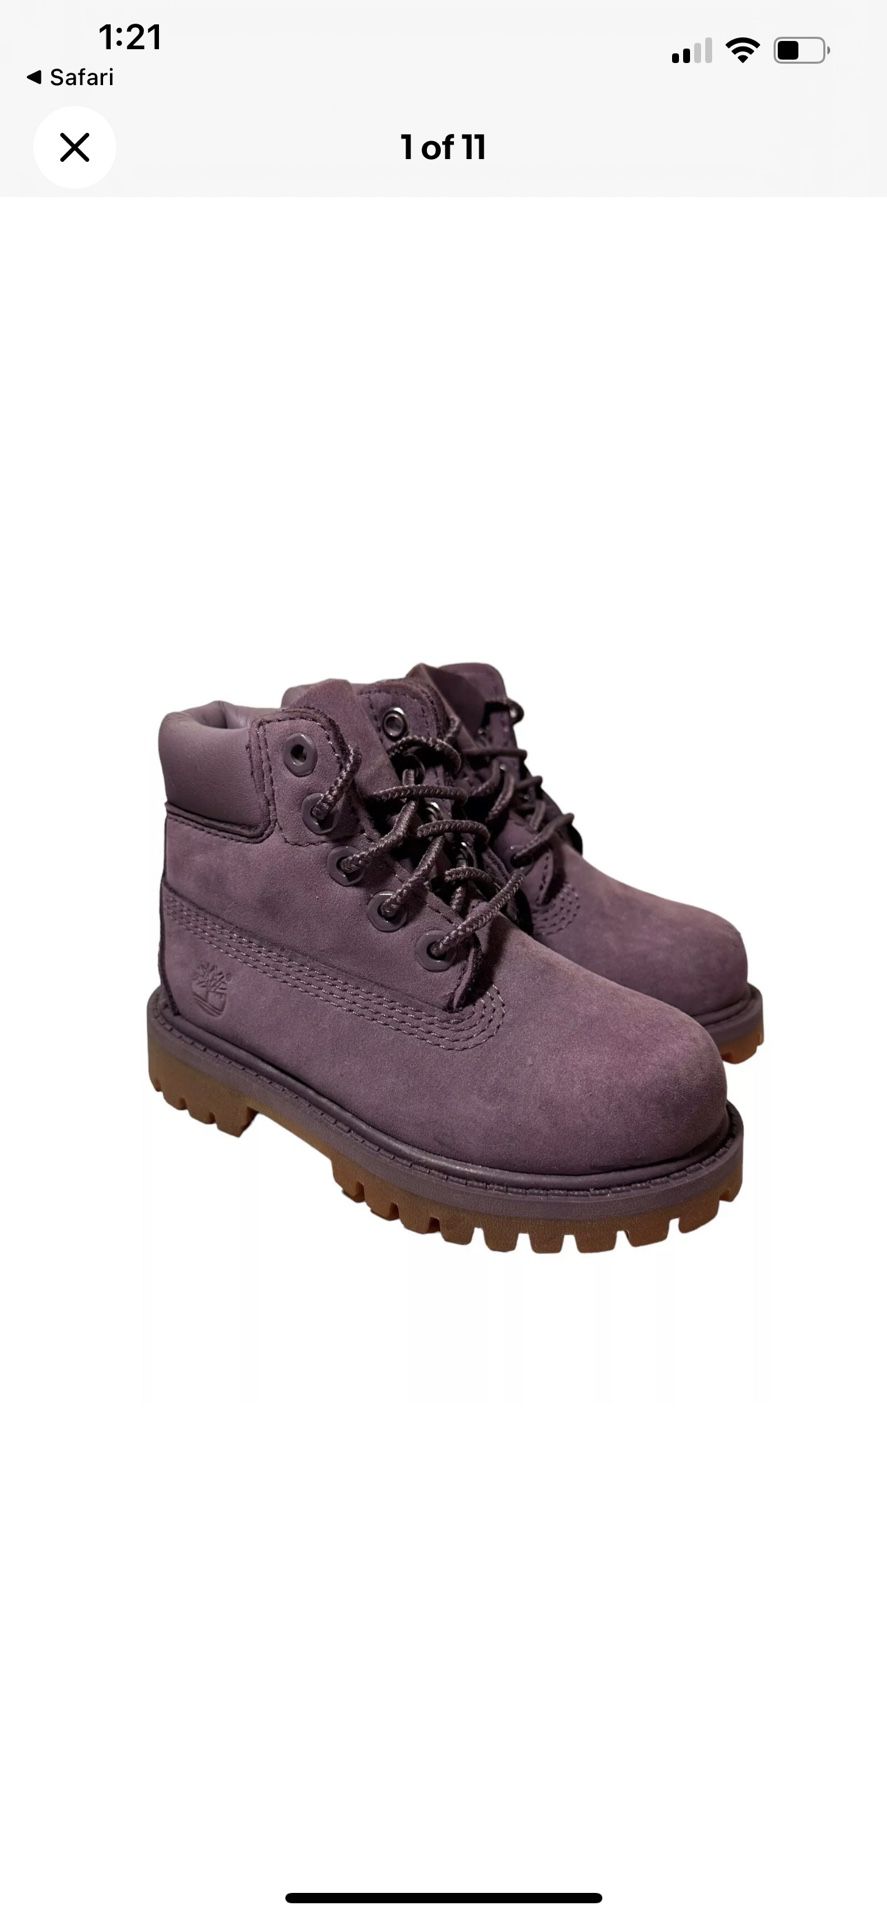 Girls Toddler Size 8 Timberland Boots 